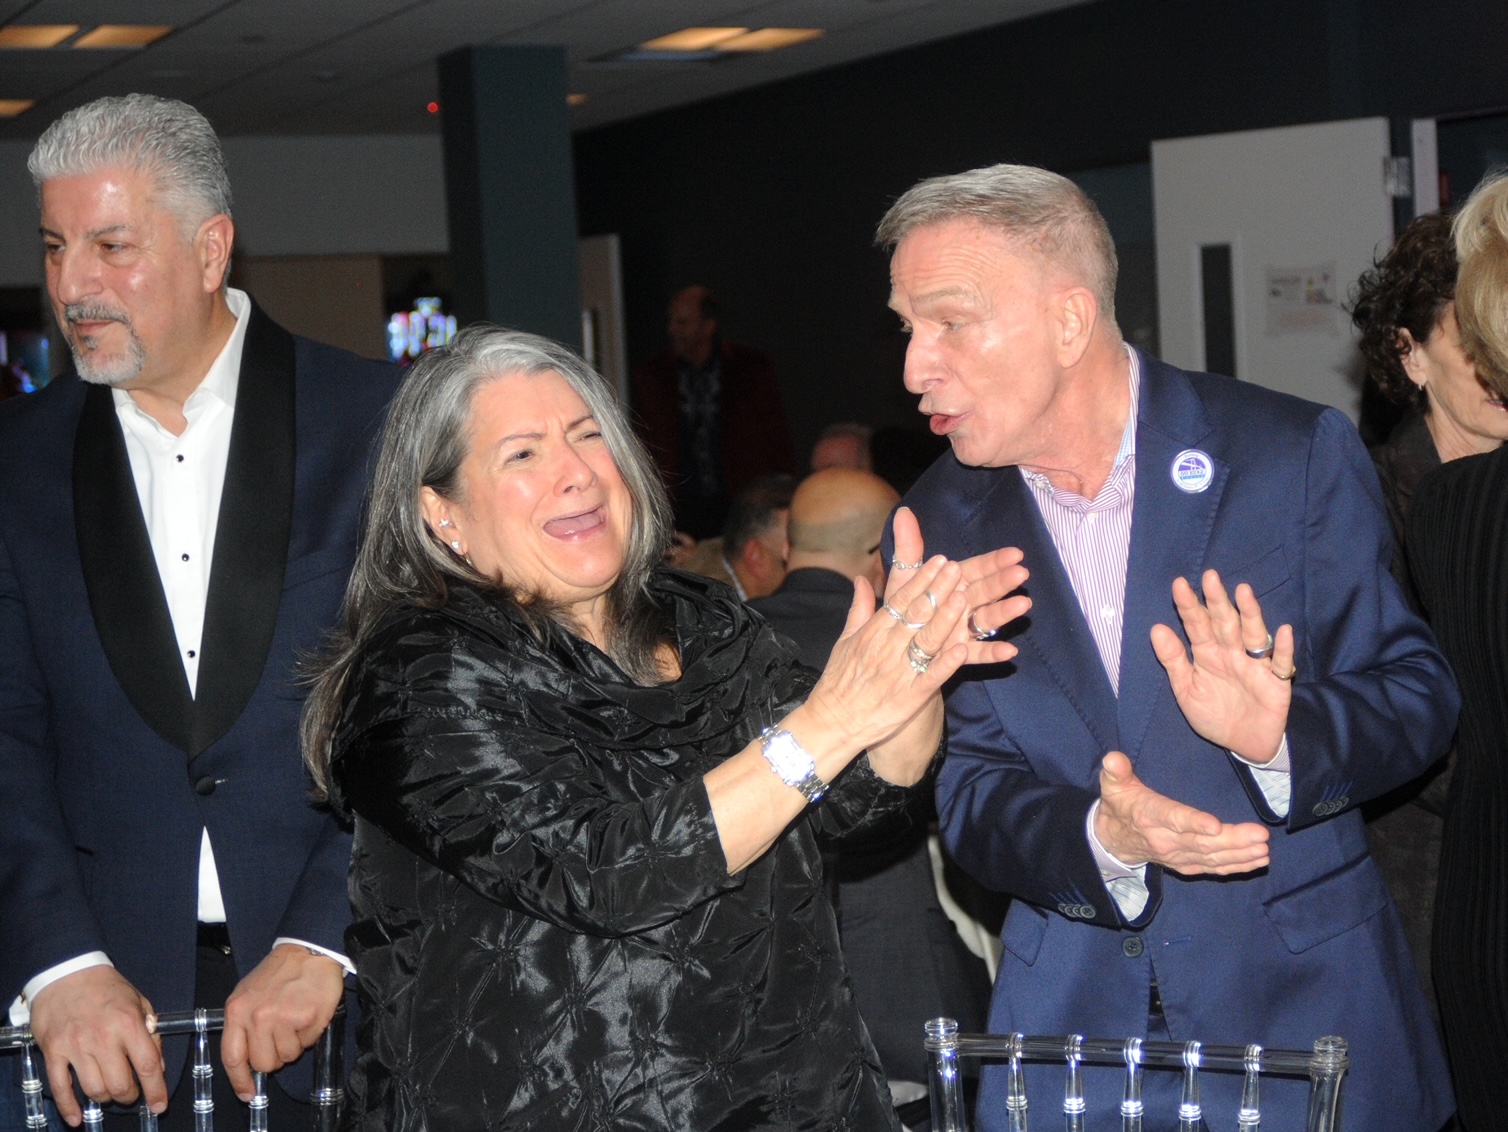 From left: John Abi-Habib, chair, Bay Ridge Center (BRC) Building Campaign Committee; Lorraine Cortes-Vazquez, commissioner, NYC Aging; and Todd W. Fliedner, executive director, BRC.